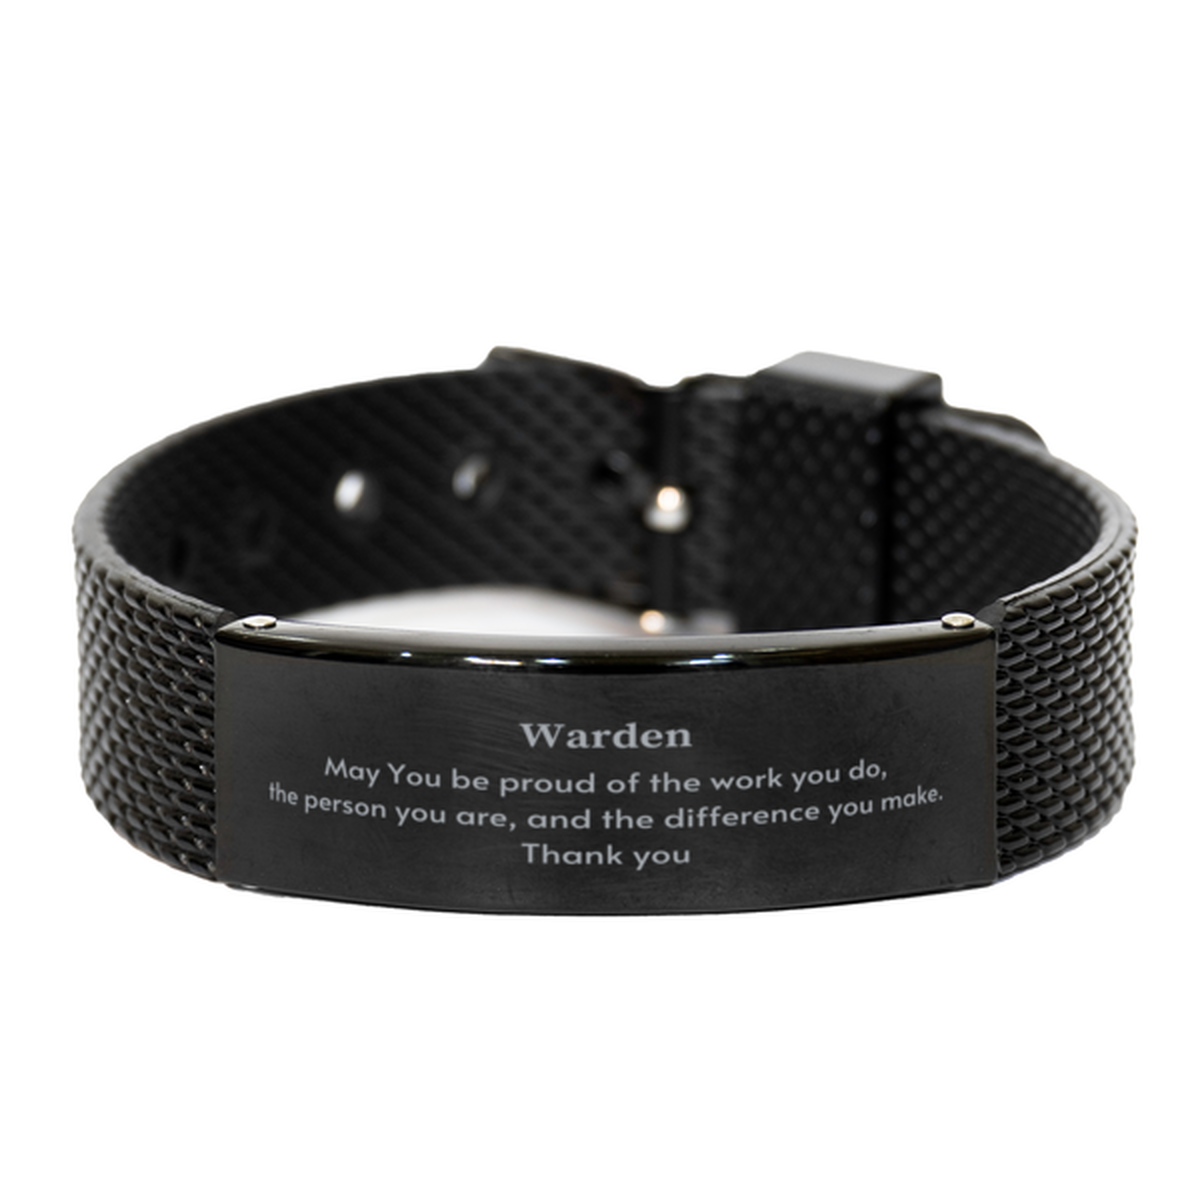 Heartwarming Black Shark Mesh Bracelet Retirement Coworkers Gifts for Warden, Warden May You be proud of the work you do, the person you are Gifts for Boss Men Women Friends